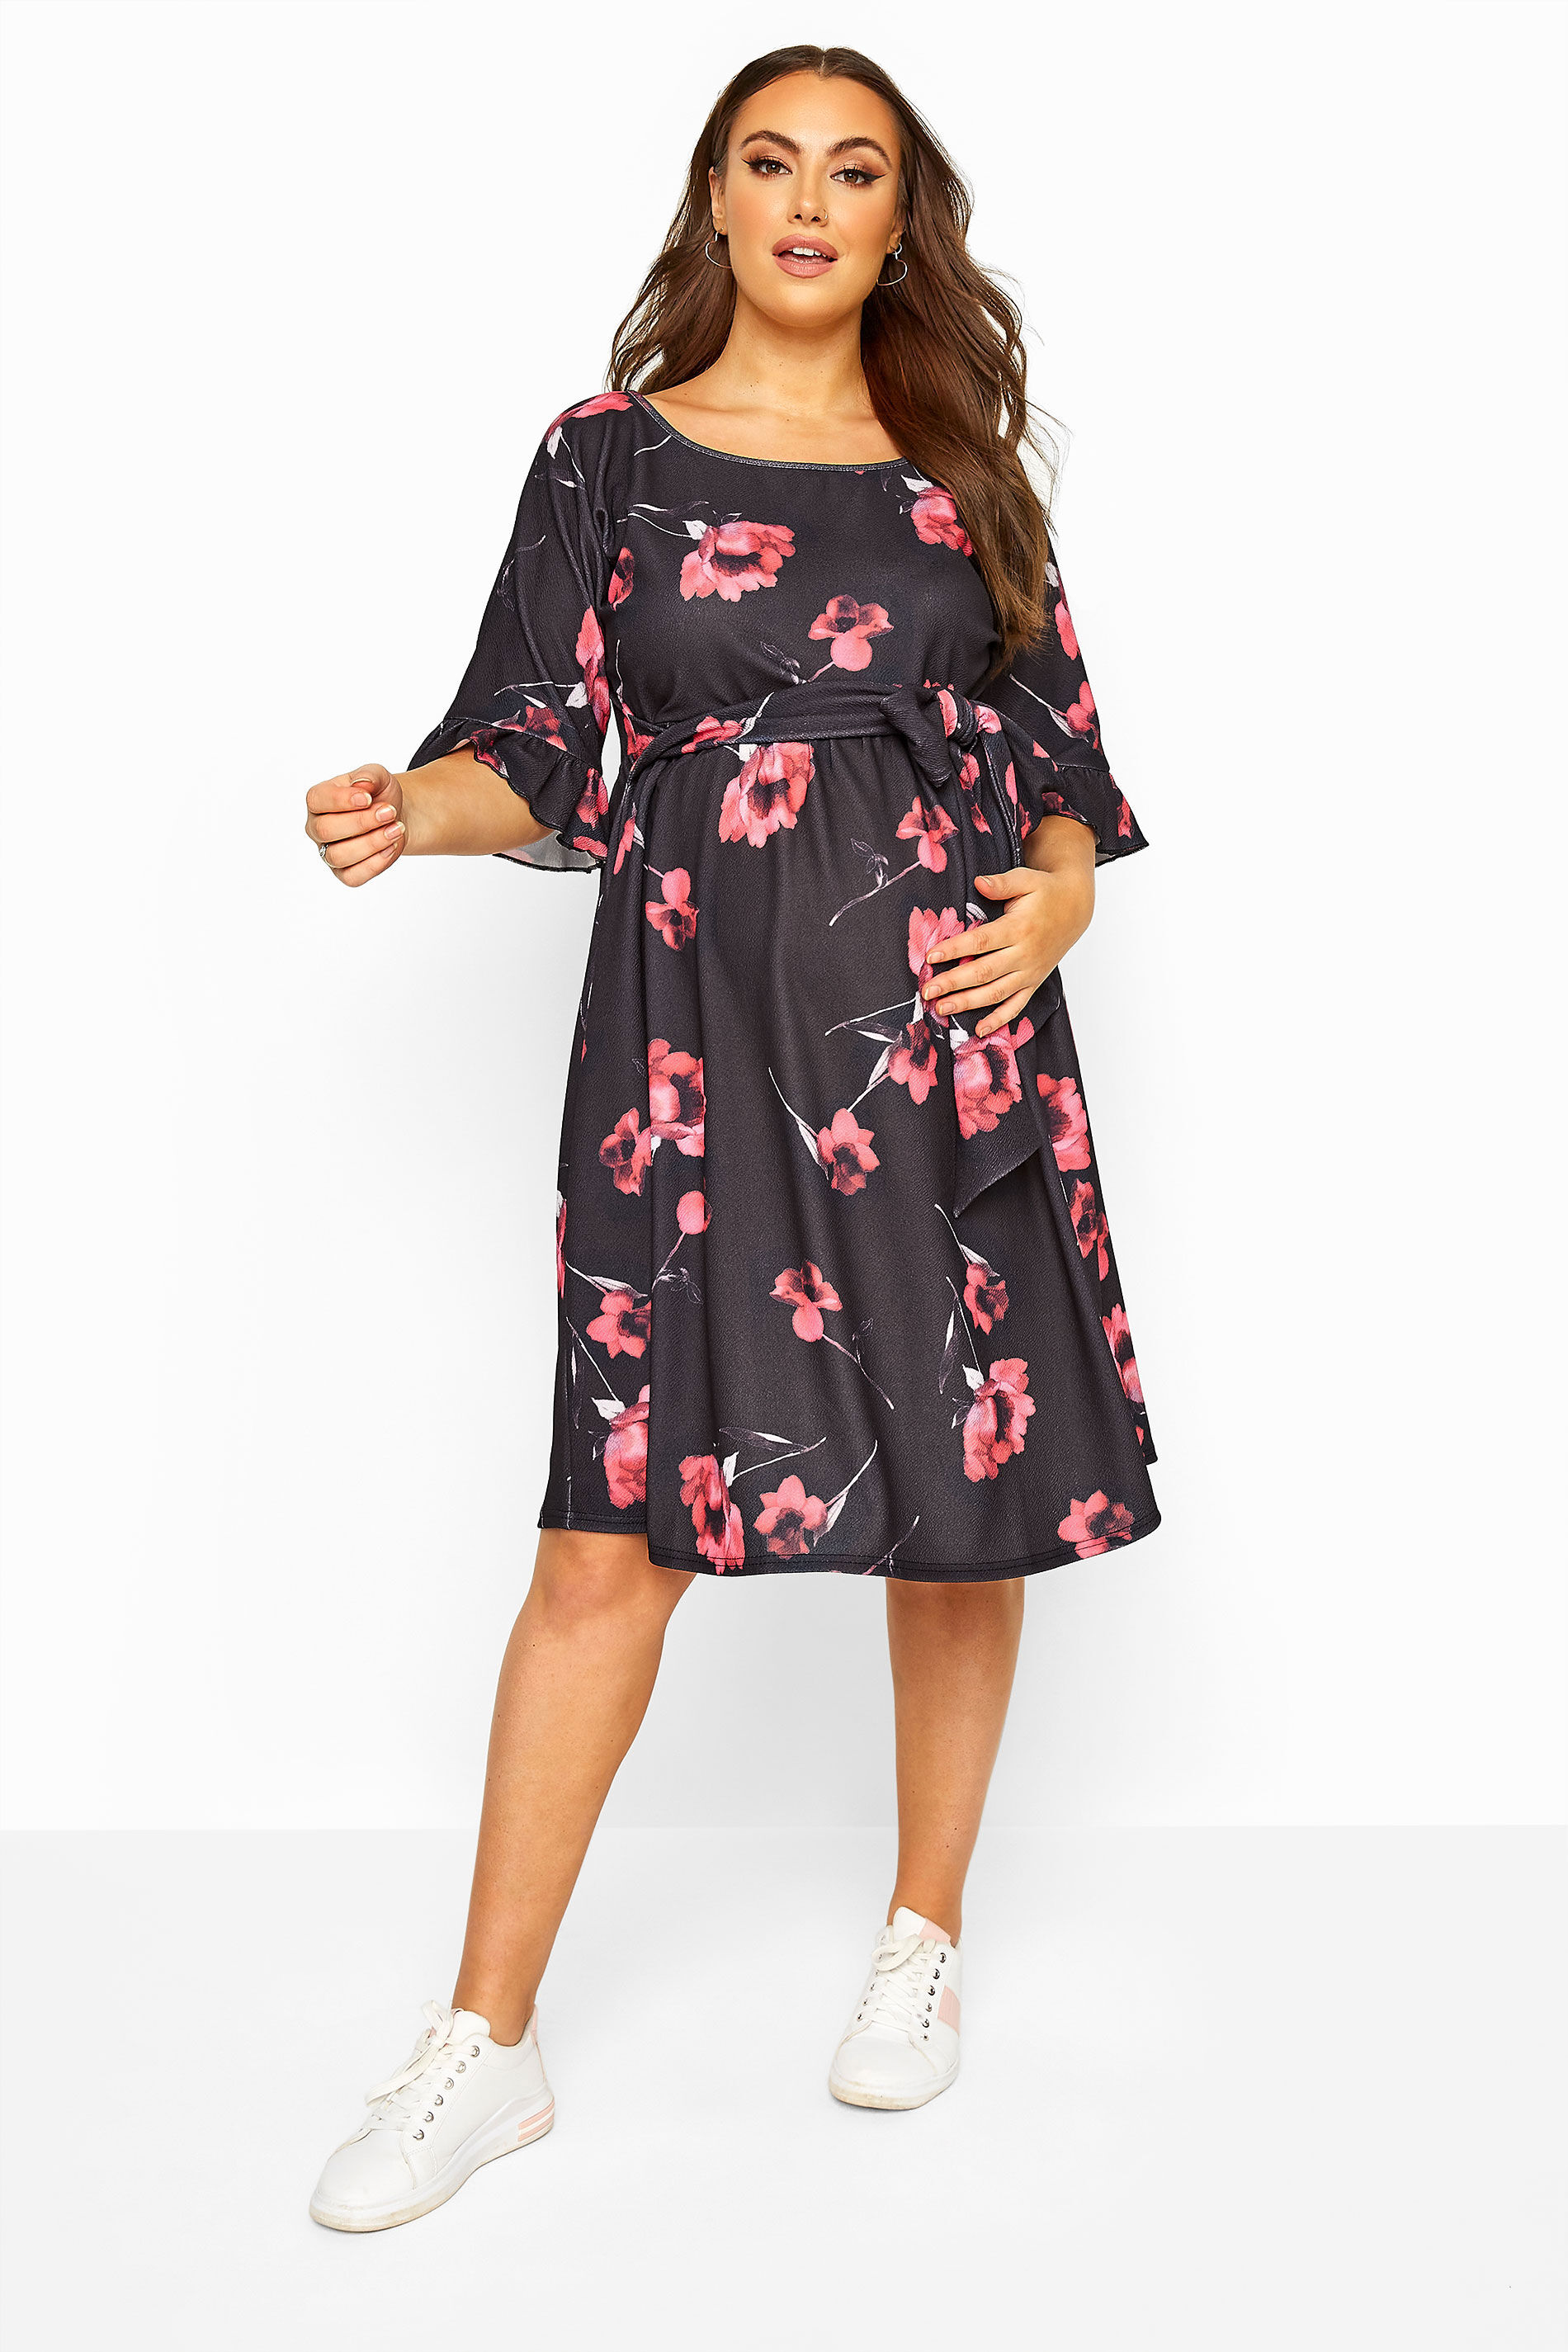 Yours Clothing Bump it up maternity black floral ruffle sleeve dress